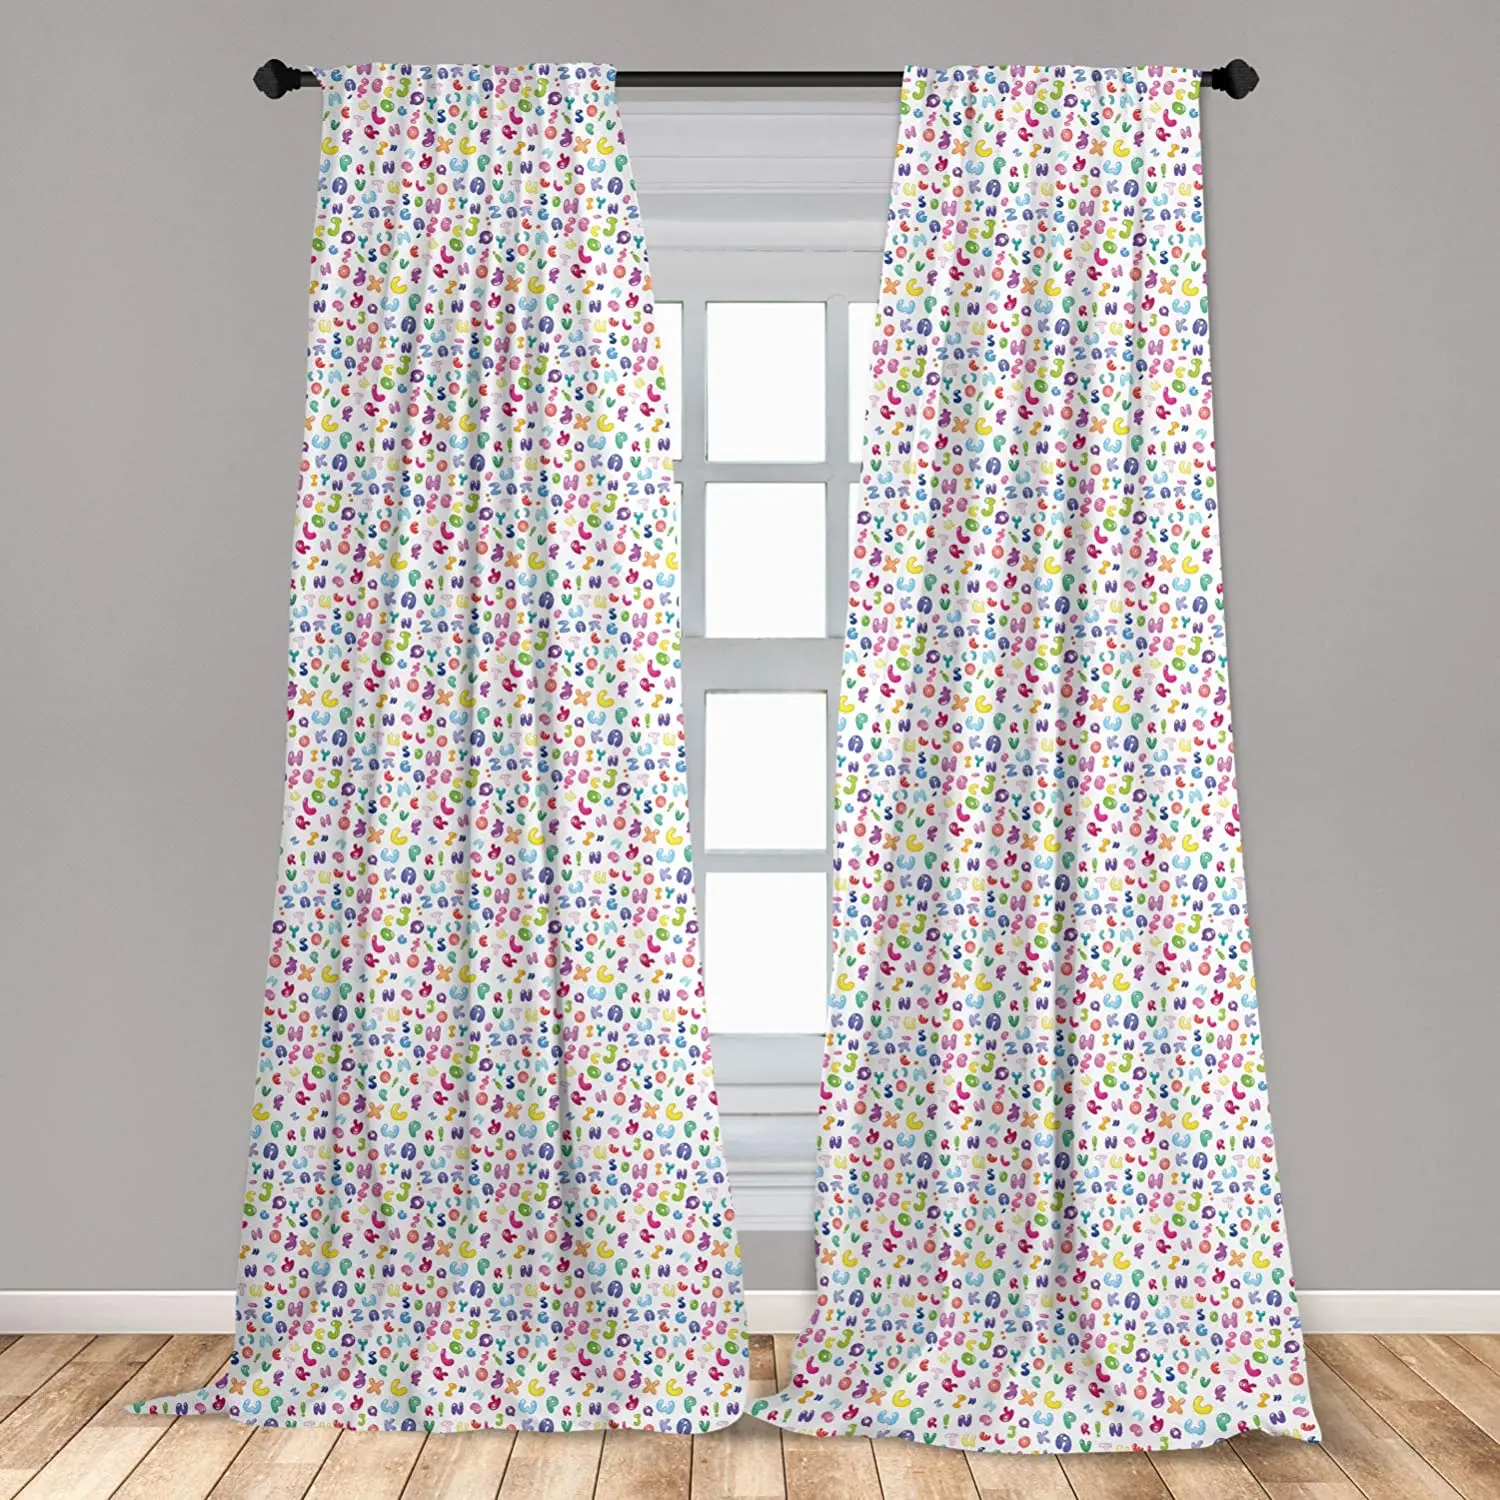 

ABC Curtain for Kids Rooms Colorful Alphabet ABC Bubble Letters Doodle Style Fun Childish Nursery Window Drapes for Living Room